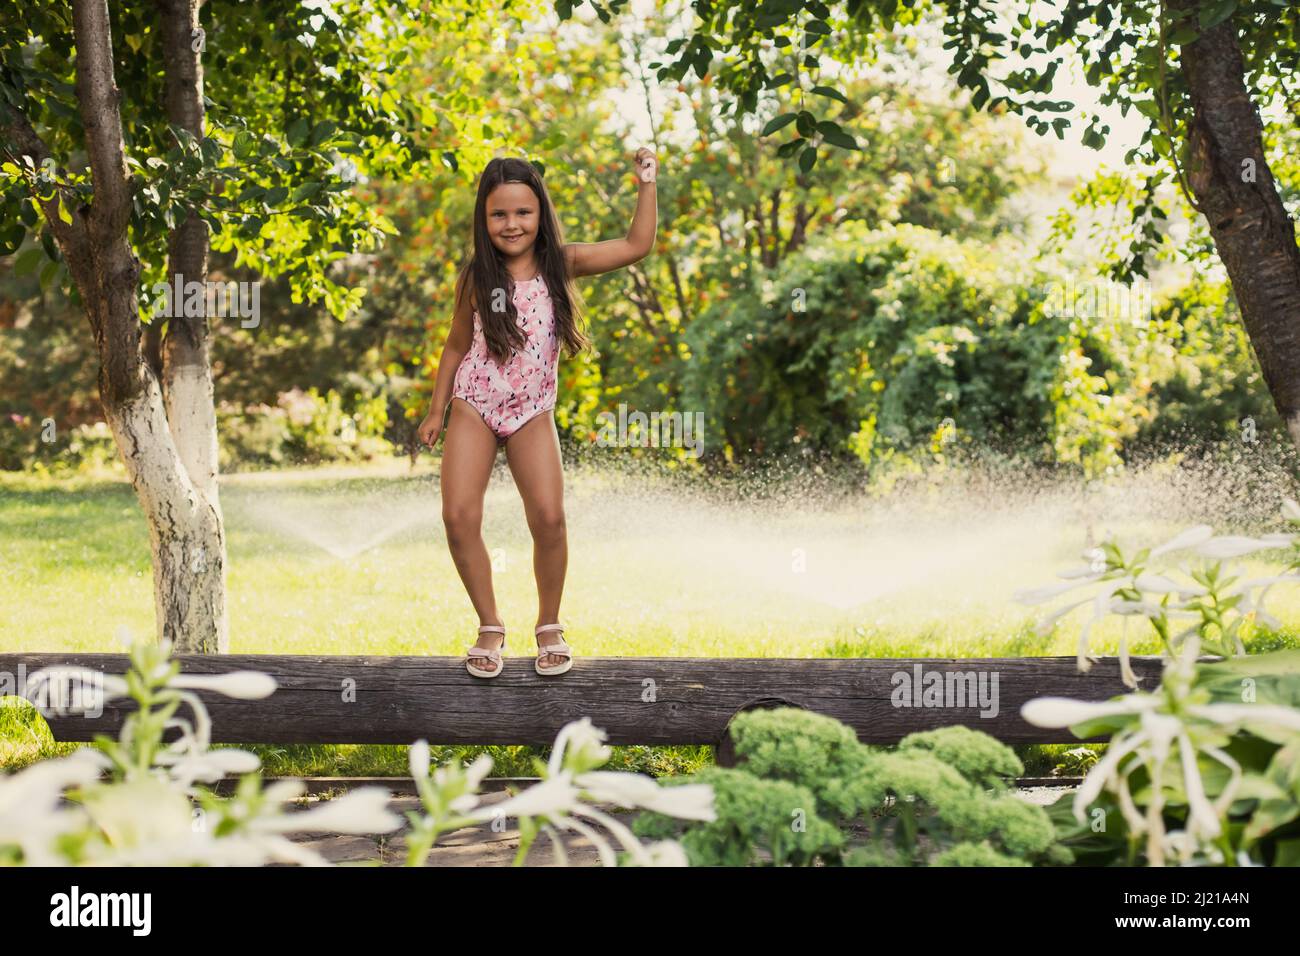 Shining young girl standing on log dancing indulging looking at camera with water sprinklers, house and green trees in background in daytime. Dreaming Stock Photo